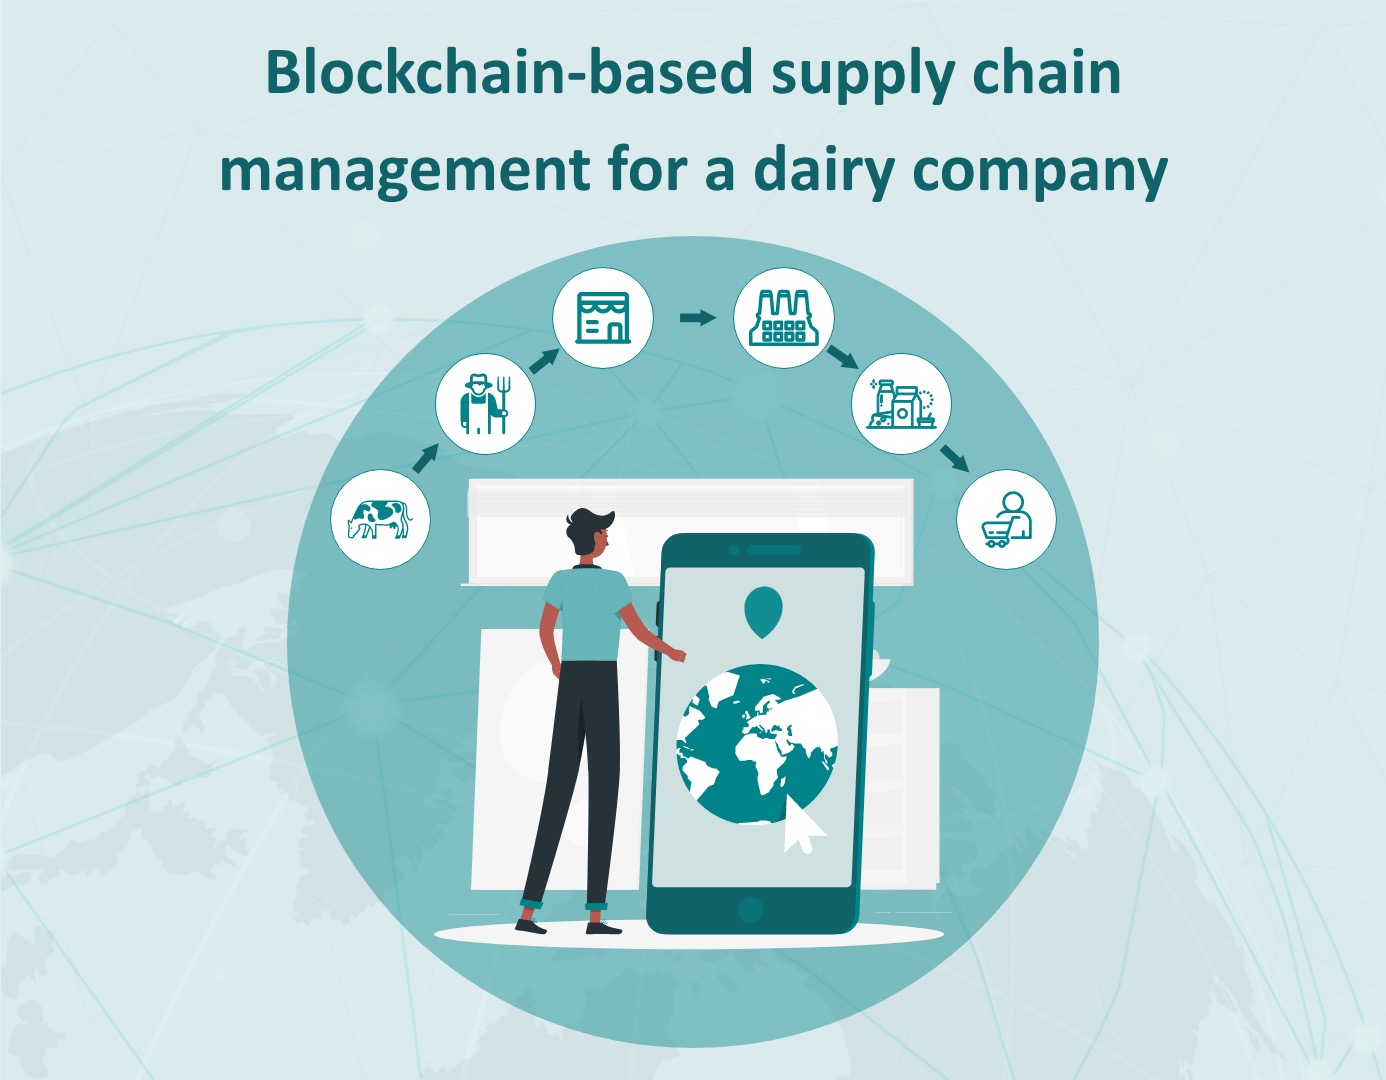 A dairy product on a blockchain background, representing blockchain-based supply chain management for a dairy company.